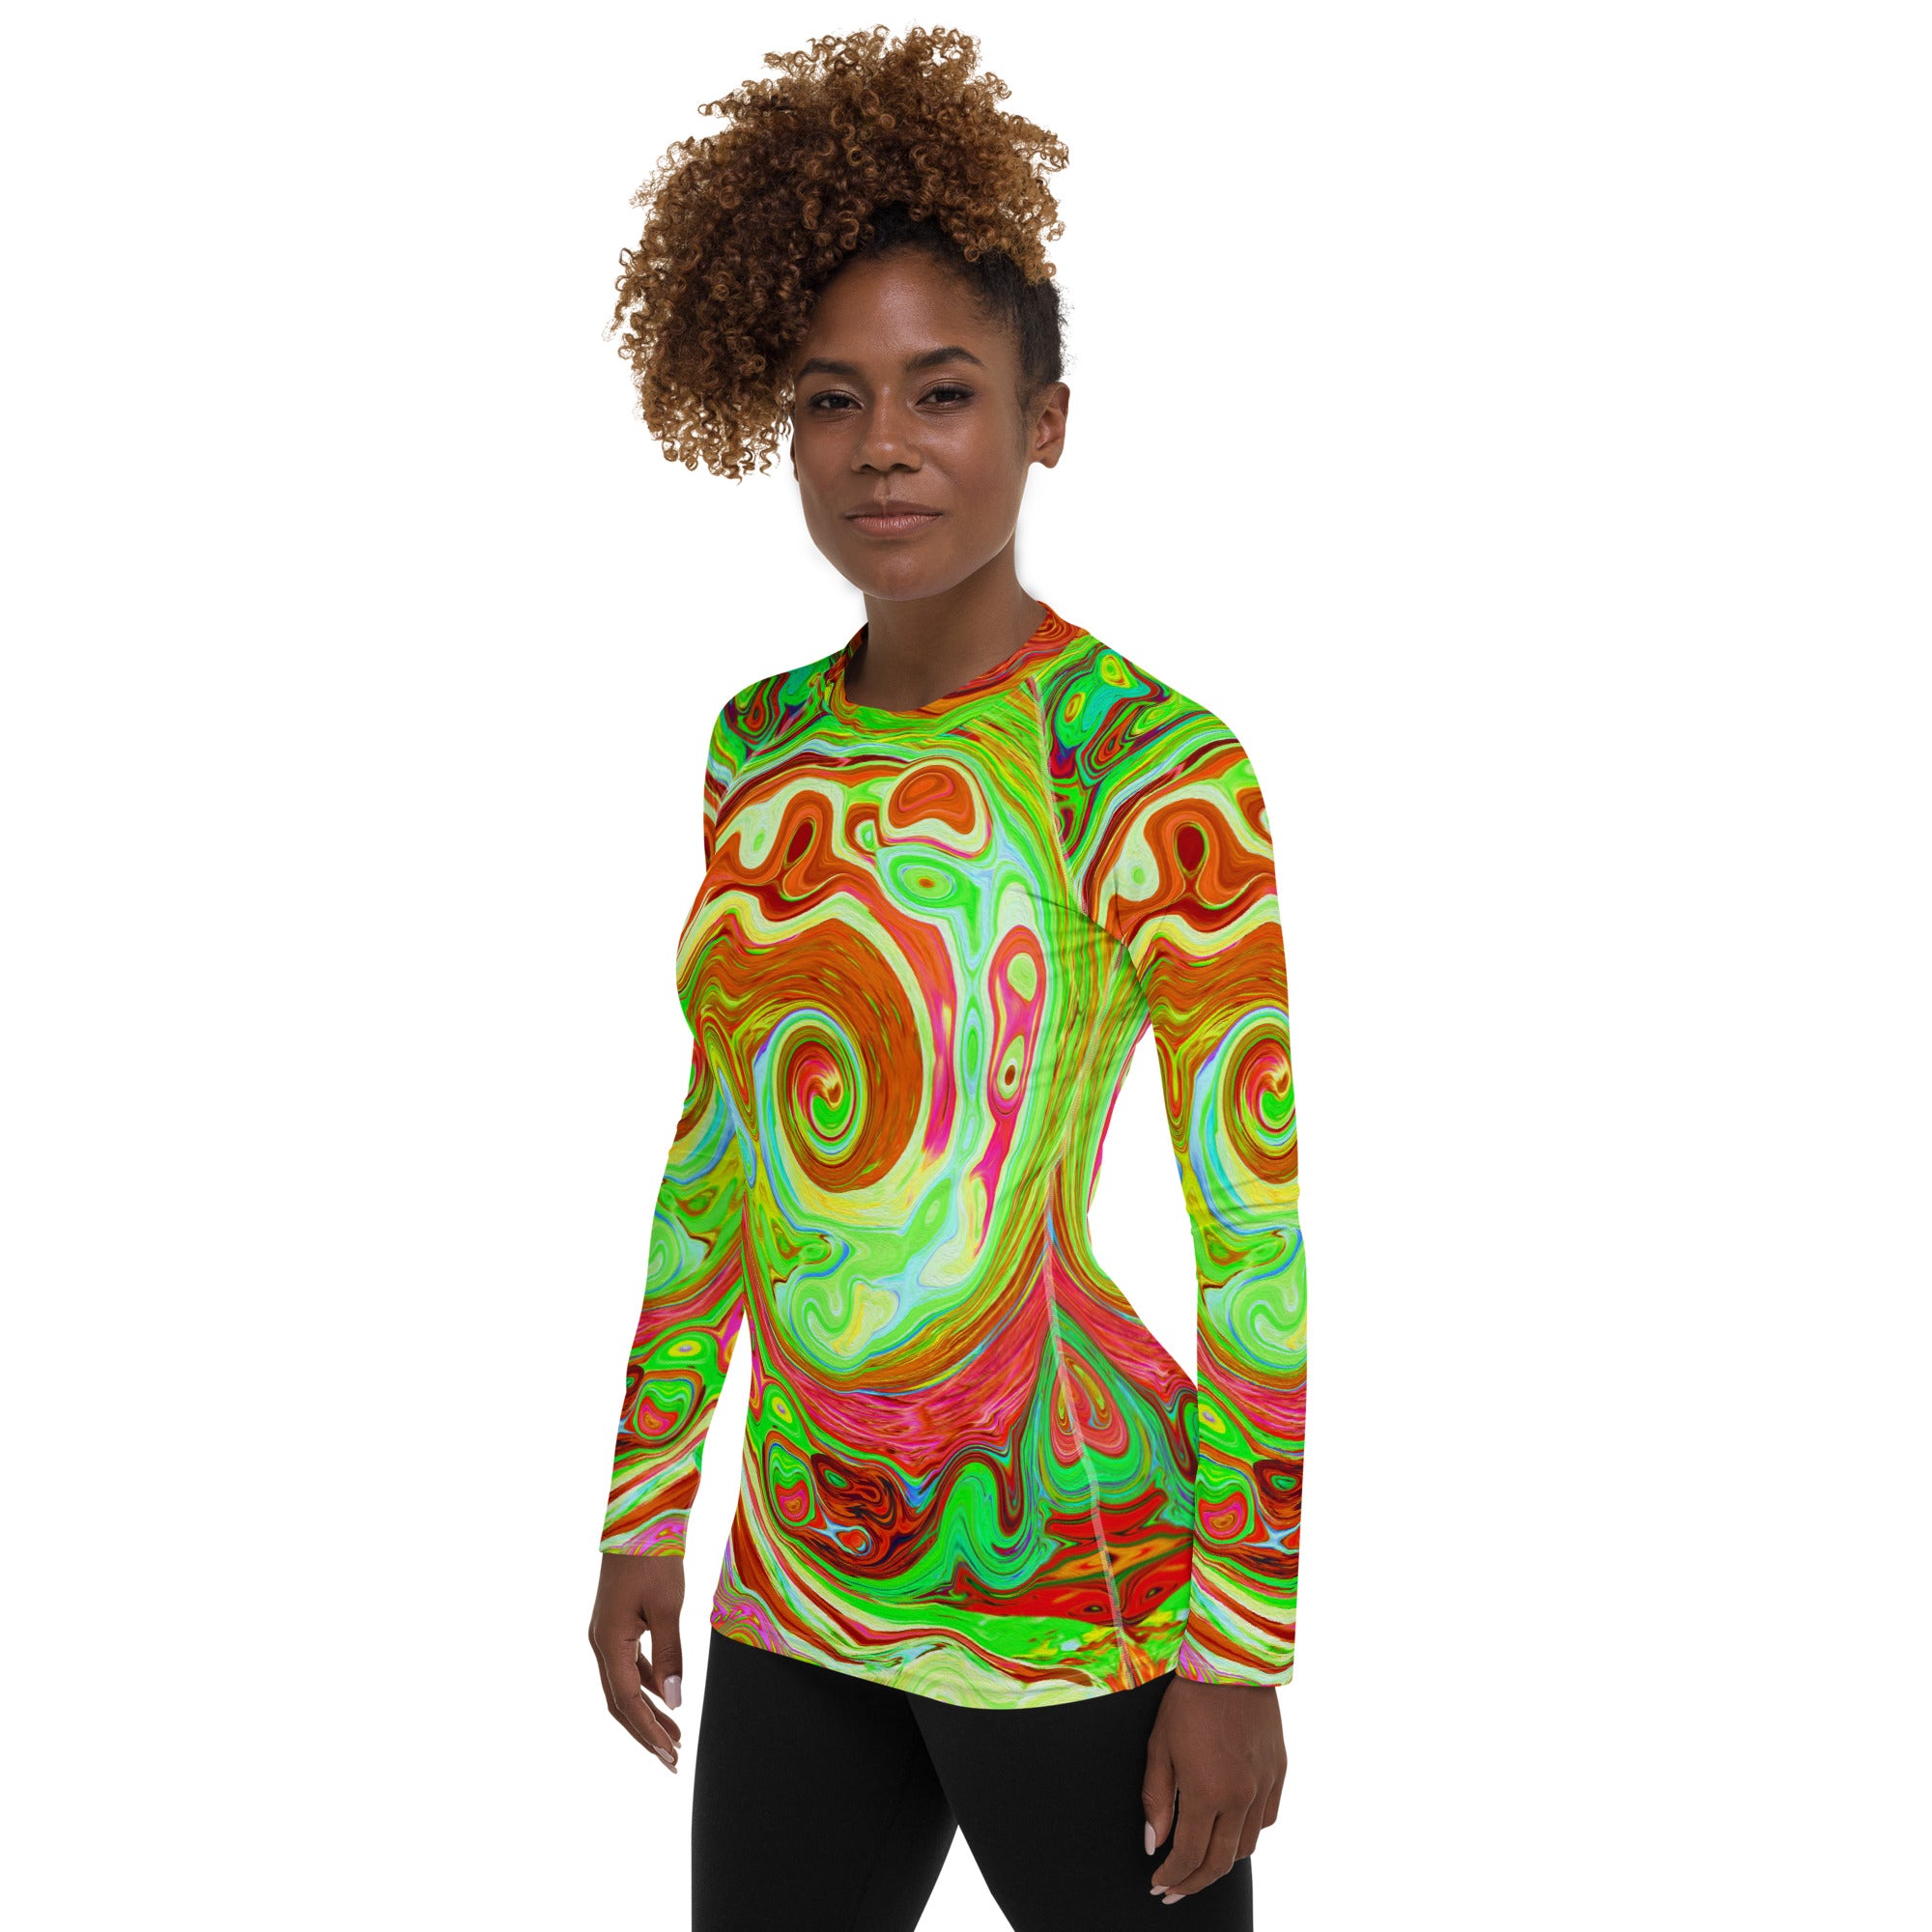 Women's Rash Guard Shirts, Groovy Abstract Retro Red and Green Swirl